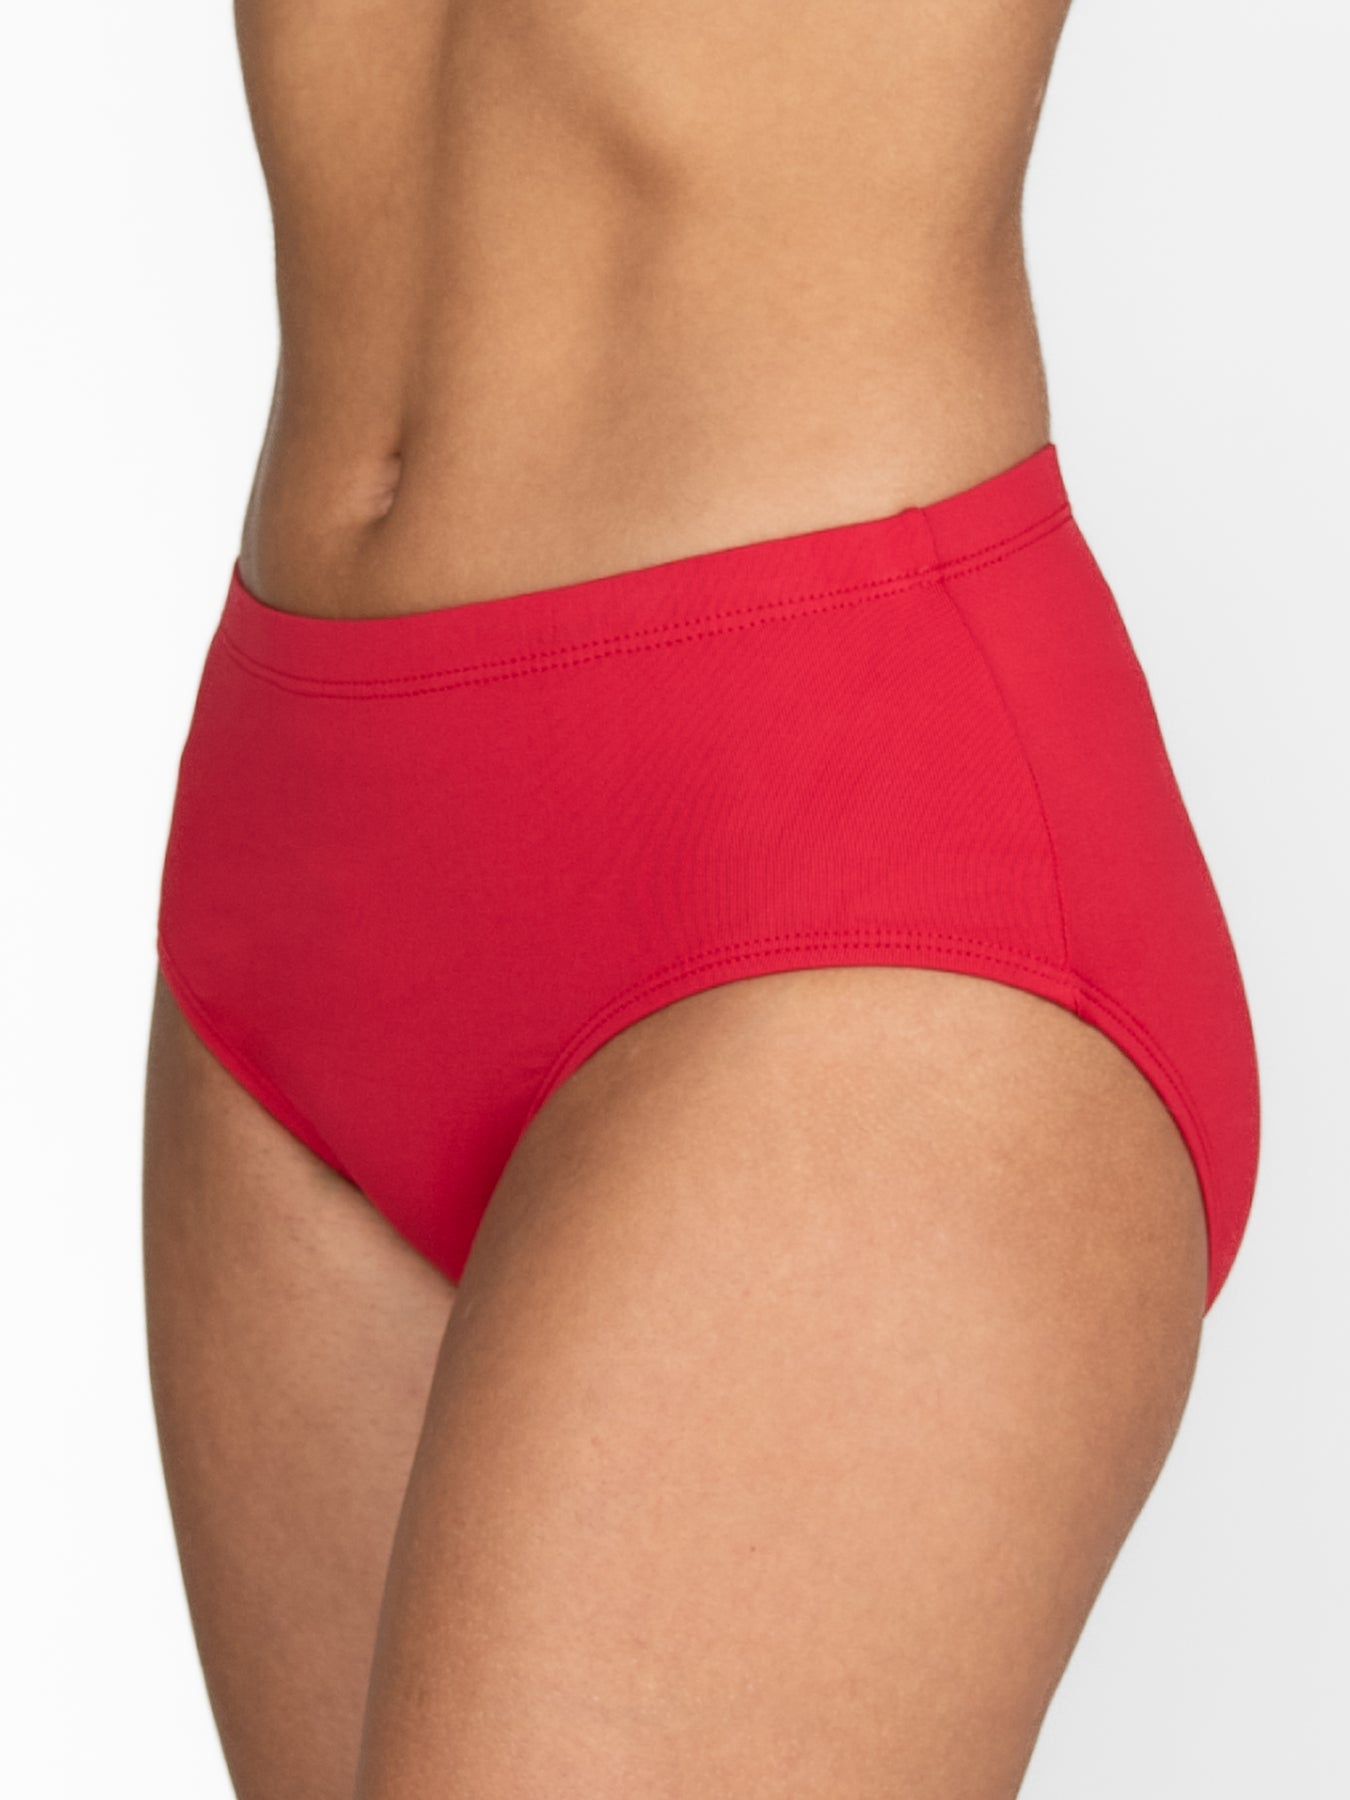 MicroTECH Athletic Brief - WOMENS – Body Wrappers